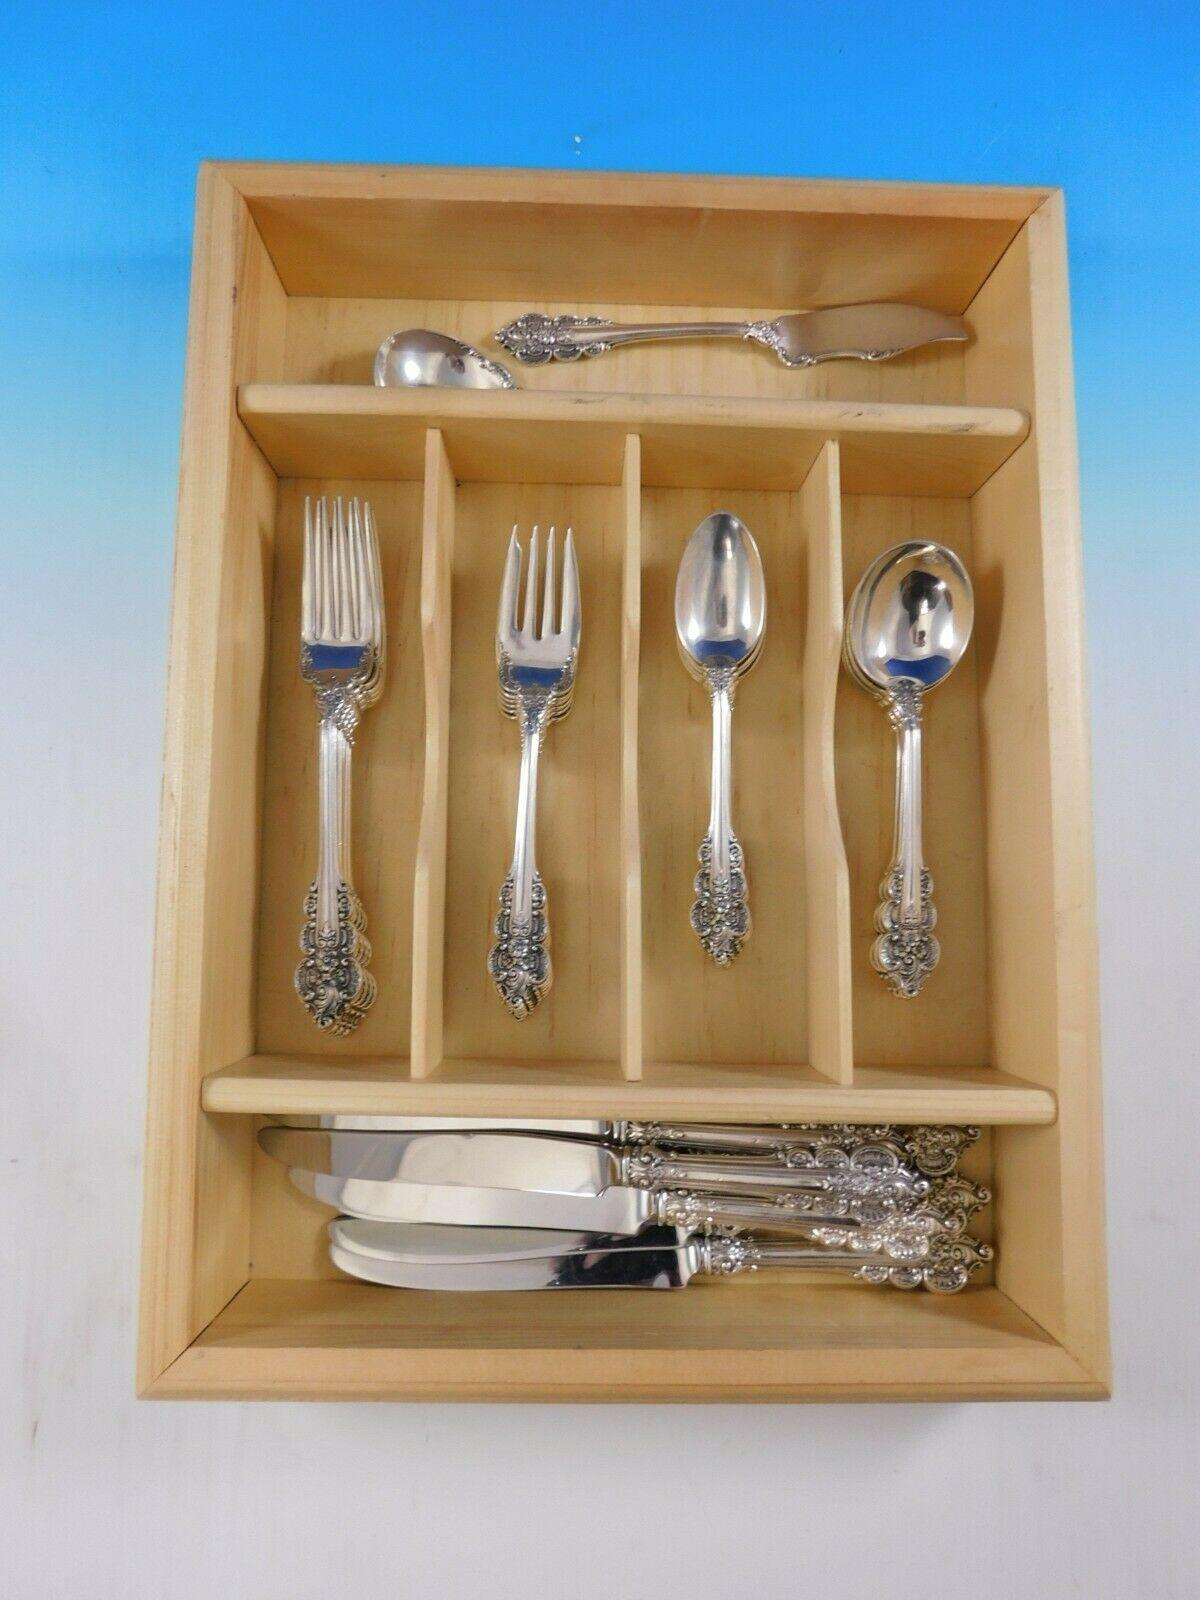 Botticelli by Frank Whiting sterling silver flatware set - 32 pieces. Great starter set! This set includes:

6 knives, 9